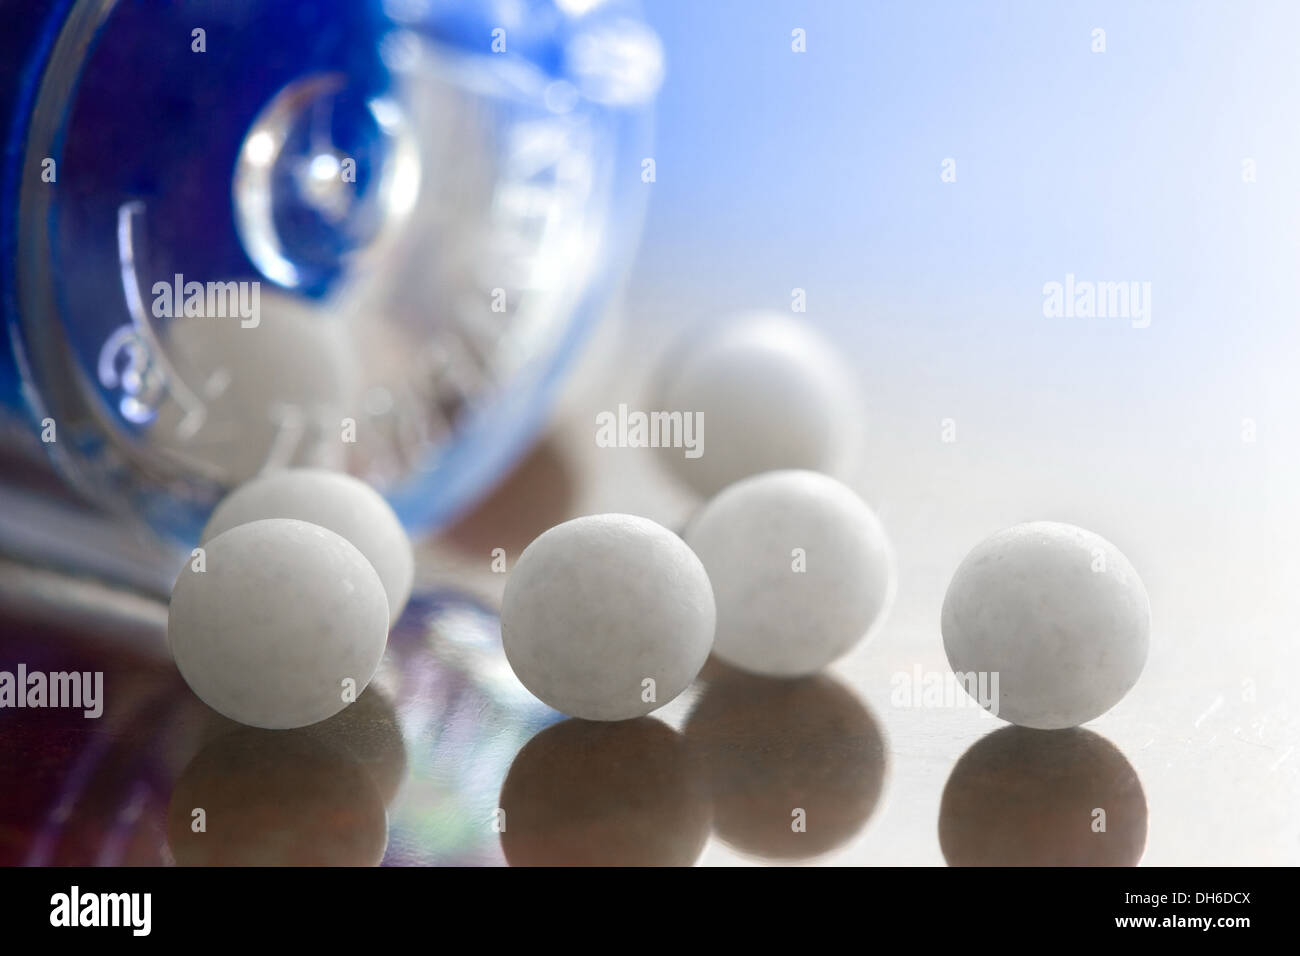 Extreme macro of homeopathic medications - small white balls and the container Stock Photo